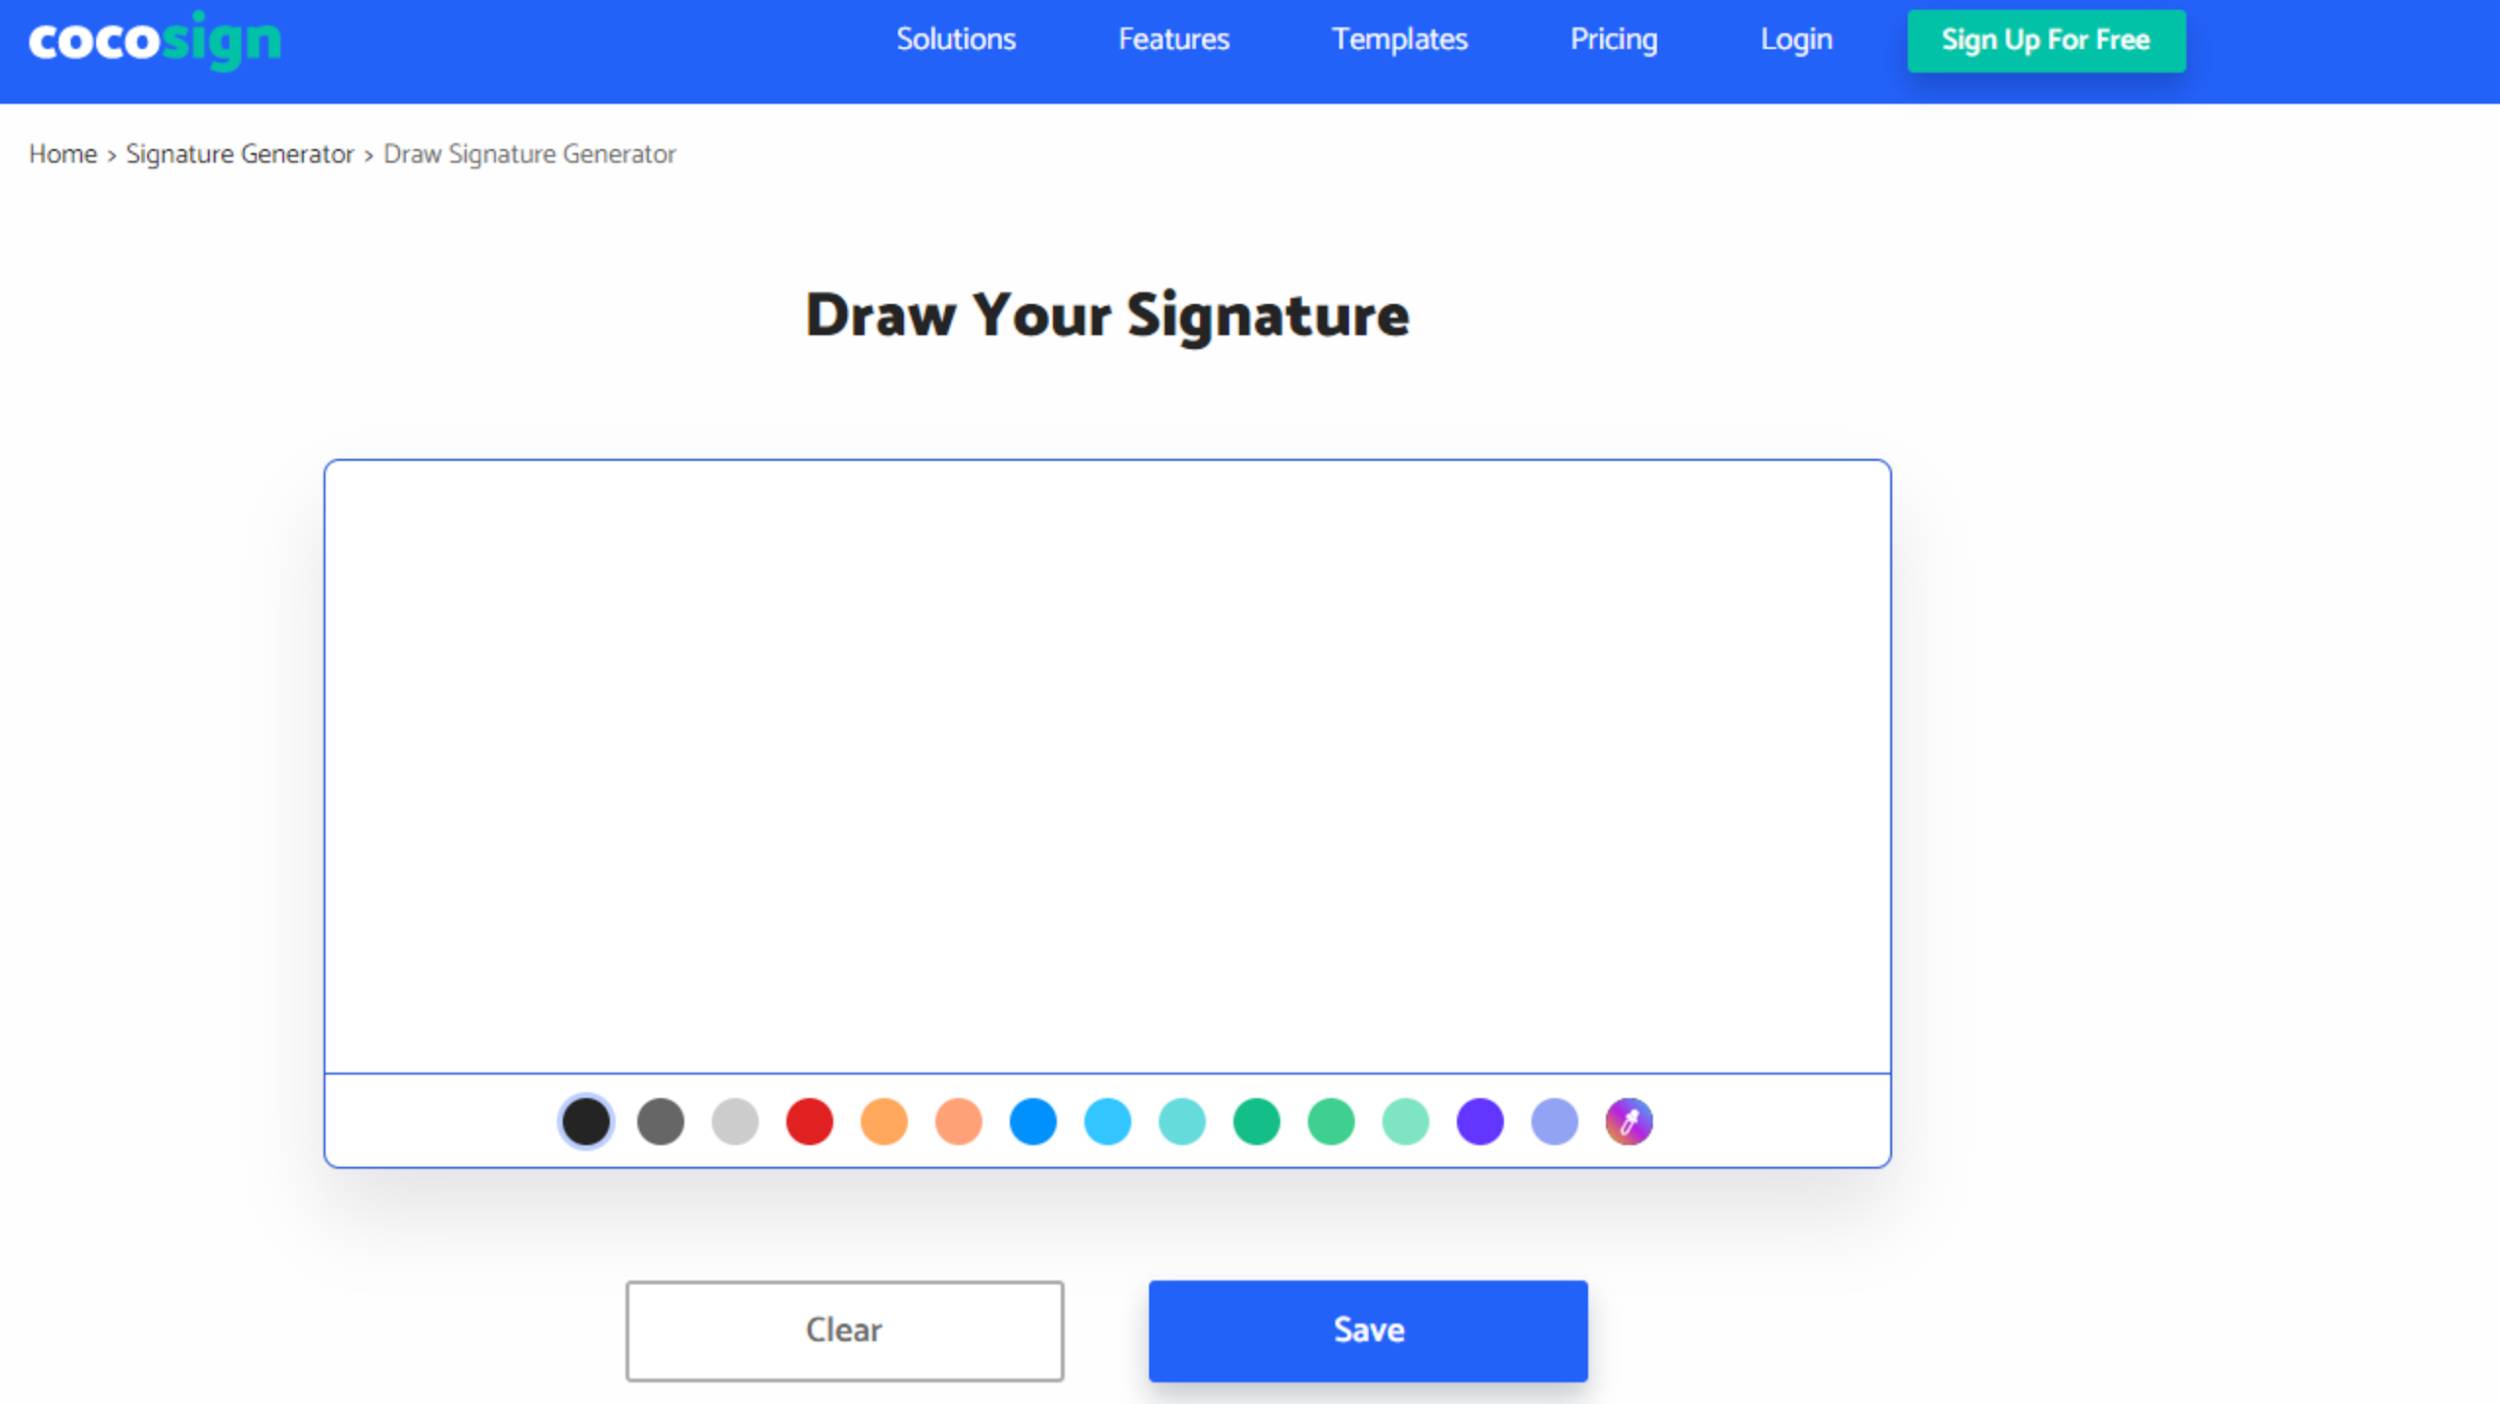 Draw your Signature with this app